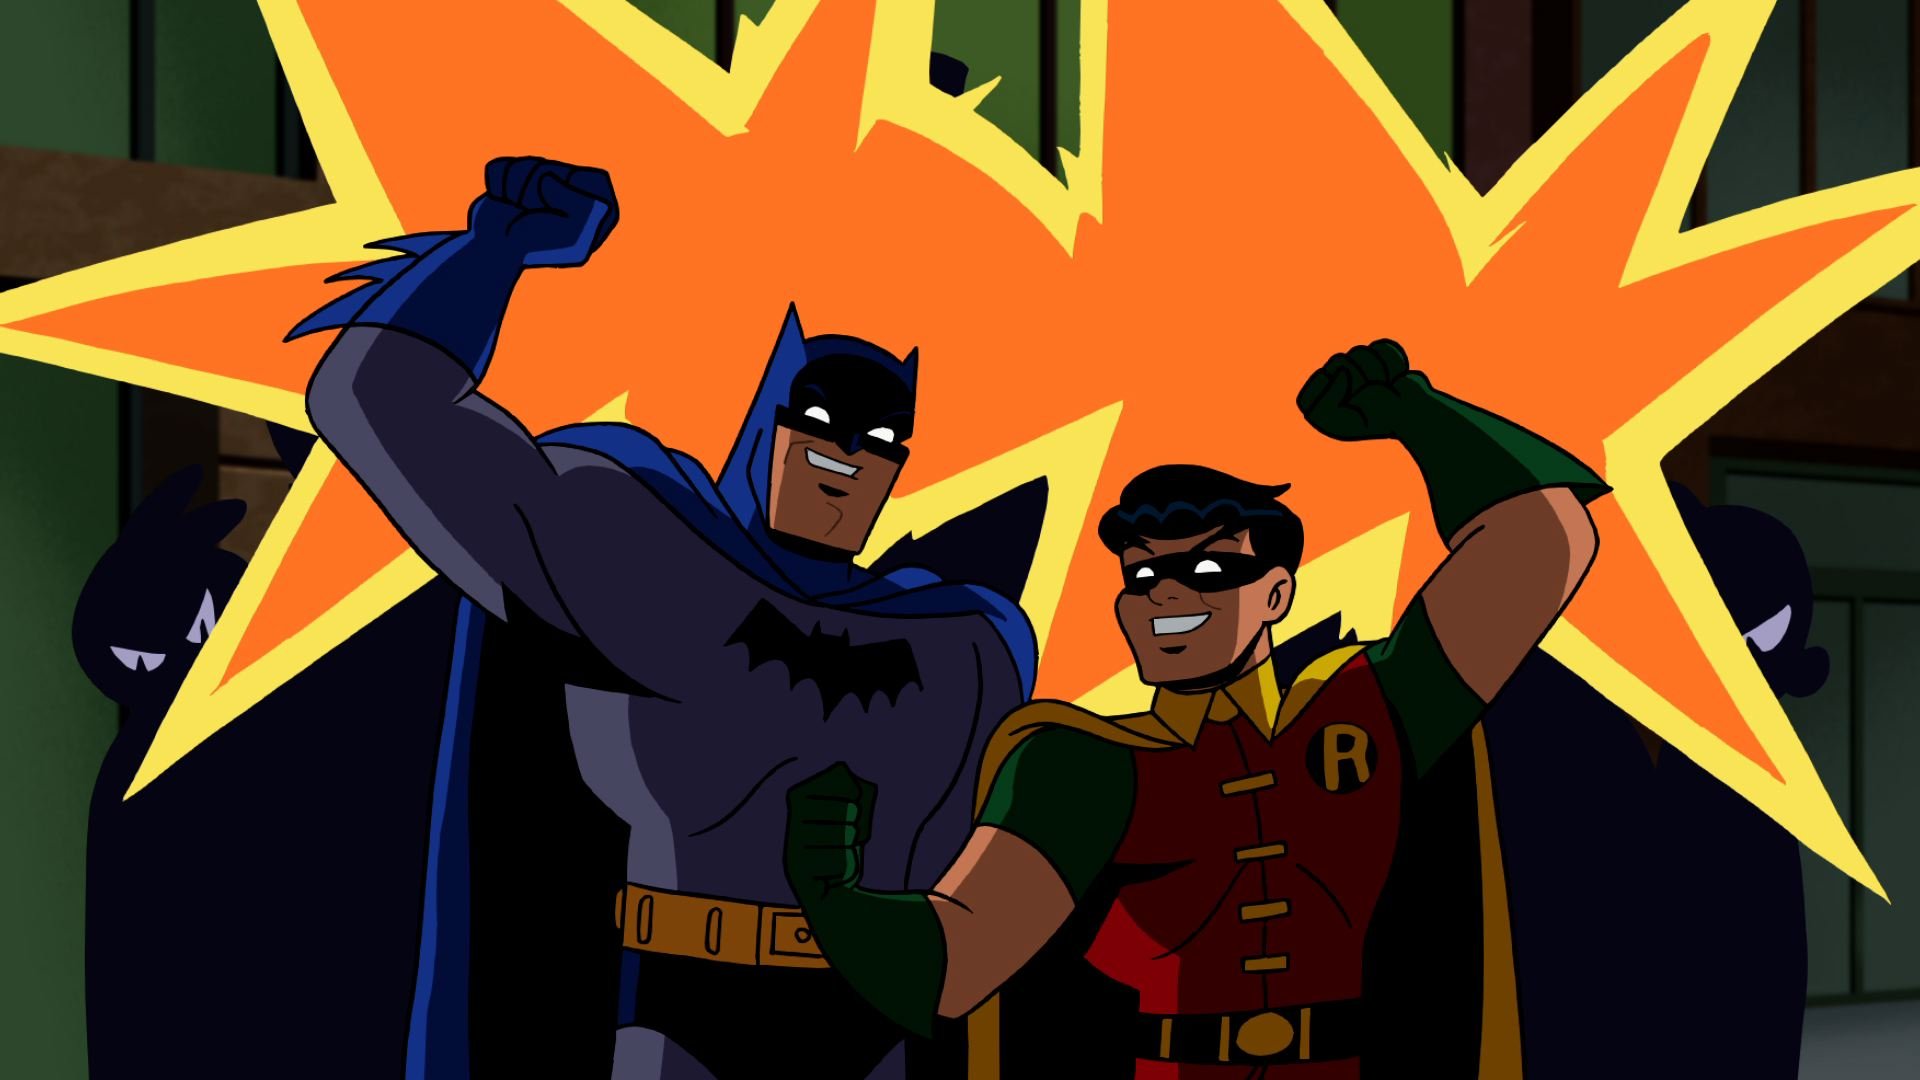 Batman: The Brave And The Bold Wallpapers